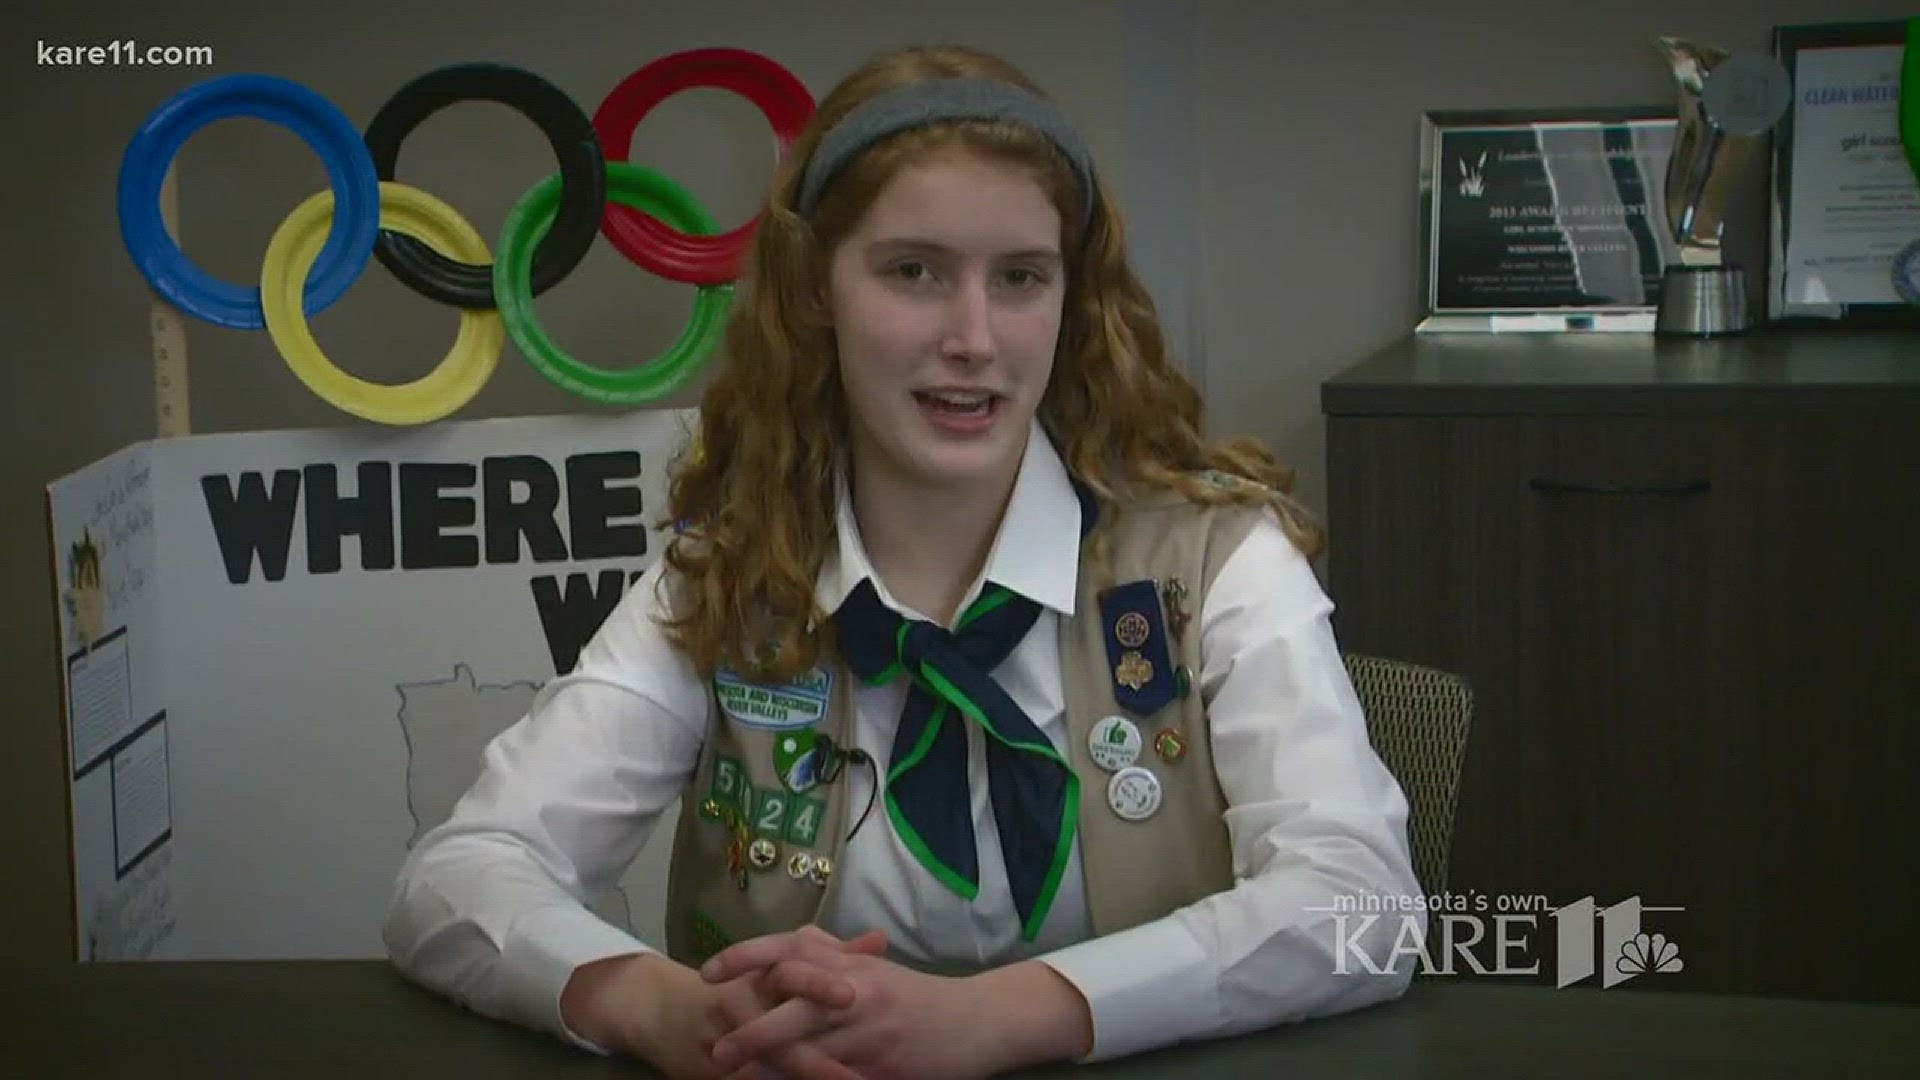 Kate Yapp is an Ambassador Girl Scout and is in the process of working towards the Girl Scout Gold Award, the highest achievement in the organization.